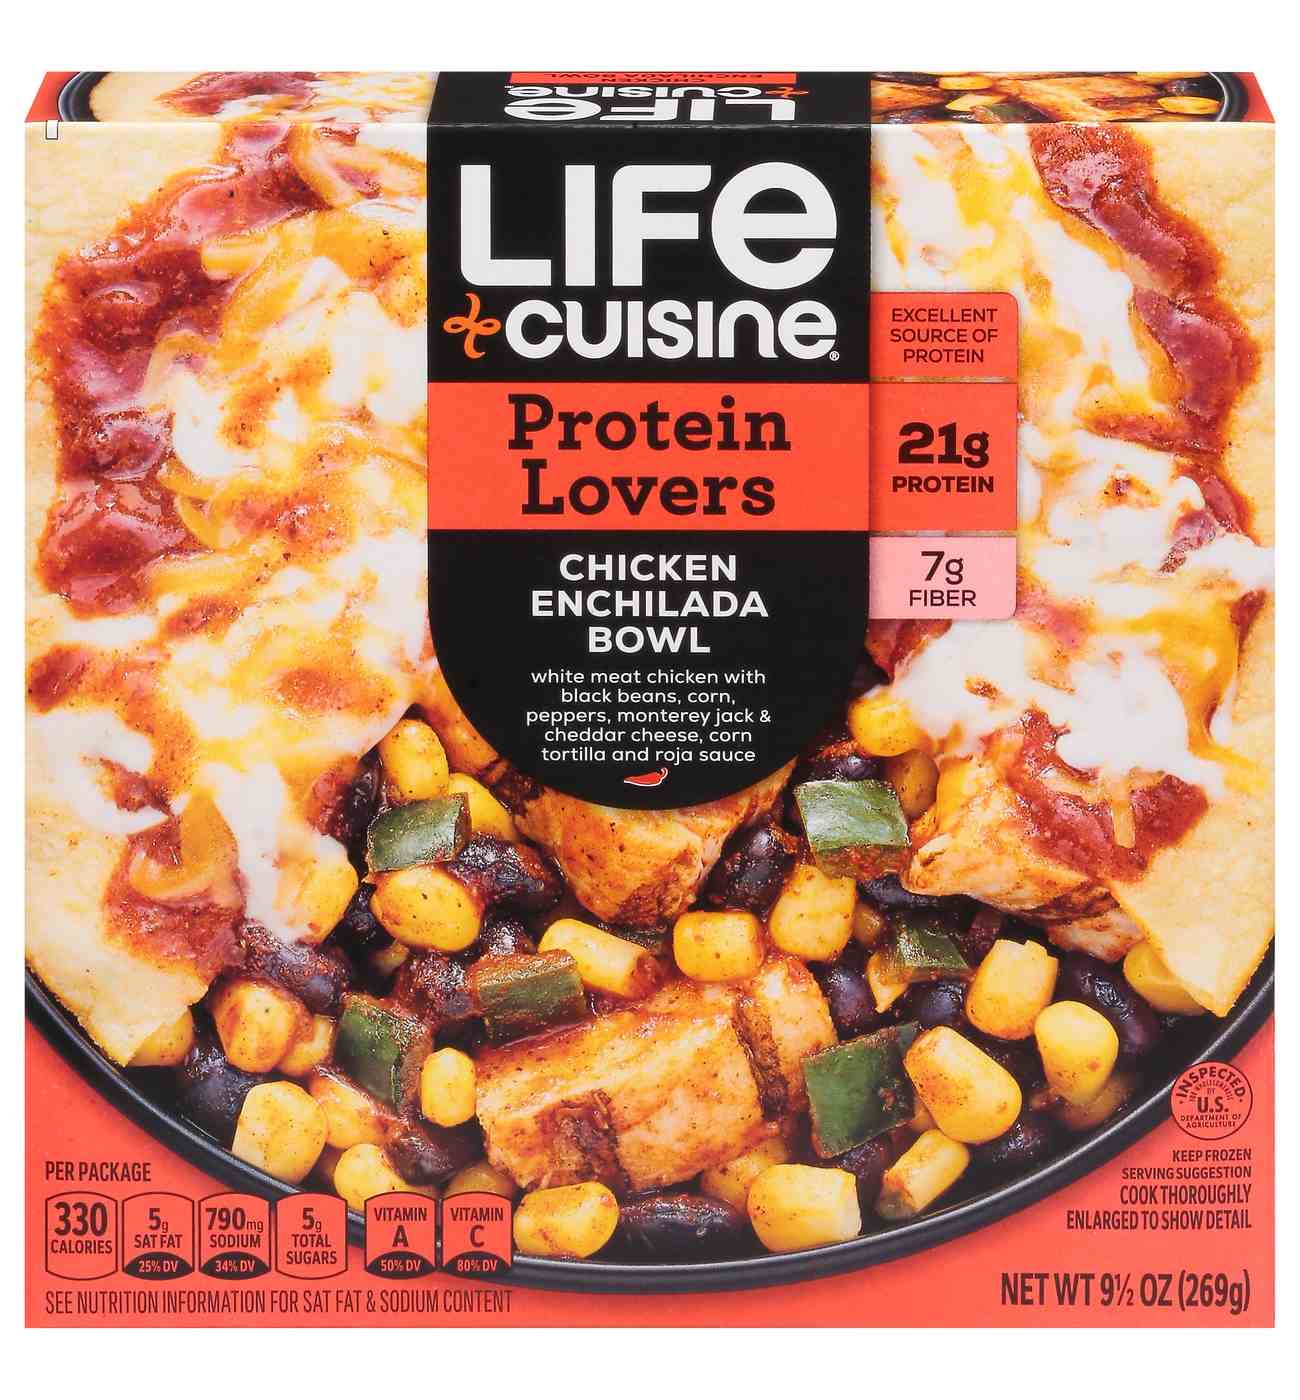 Life Cuisine Protein Lovers Chicken Enchilada Bowl Frozen Meal; image 1 of 2